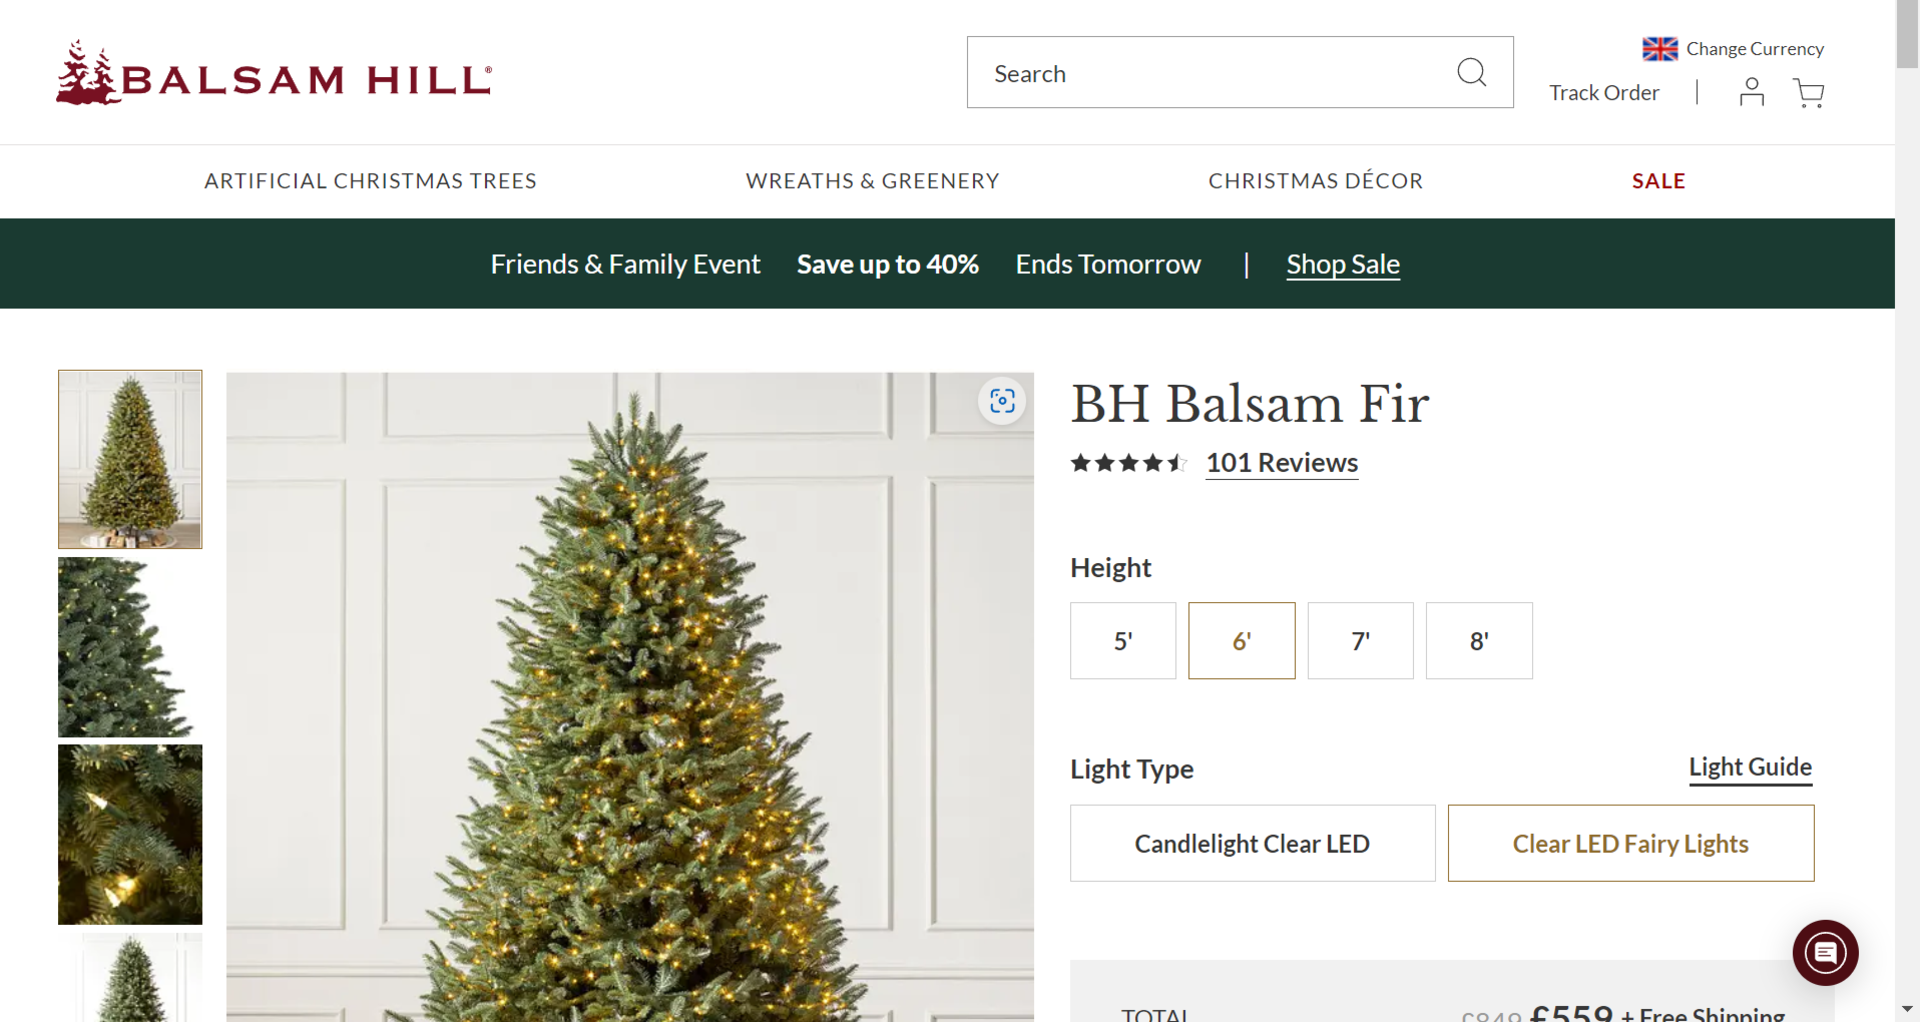 BH (The worlds leading Christmas Tree Brand) BH Balsam Fir easy plug with LED Clear Fairy Lights. - Image 2 of 2